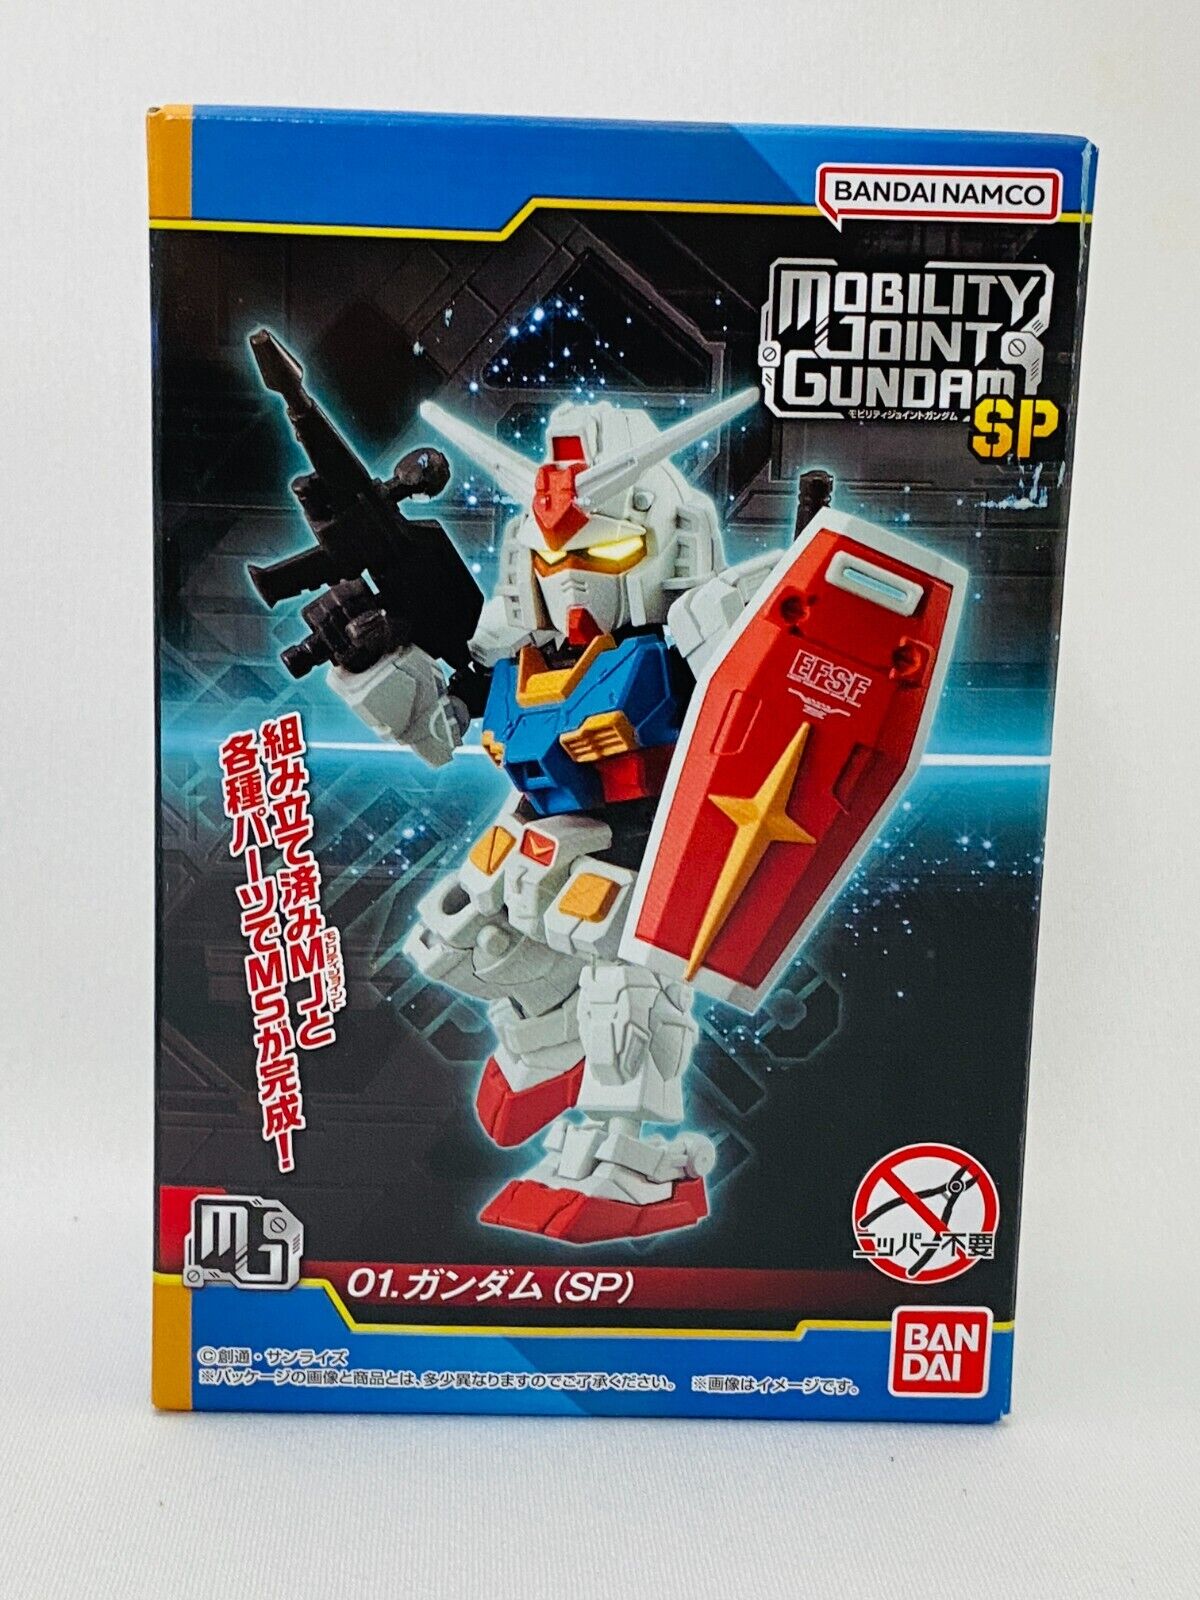 FW MOBILITY JOINT GUNDAM SP / 1. Gundam SP / BANDAI Collection Figure toy New